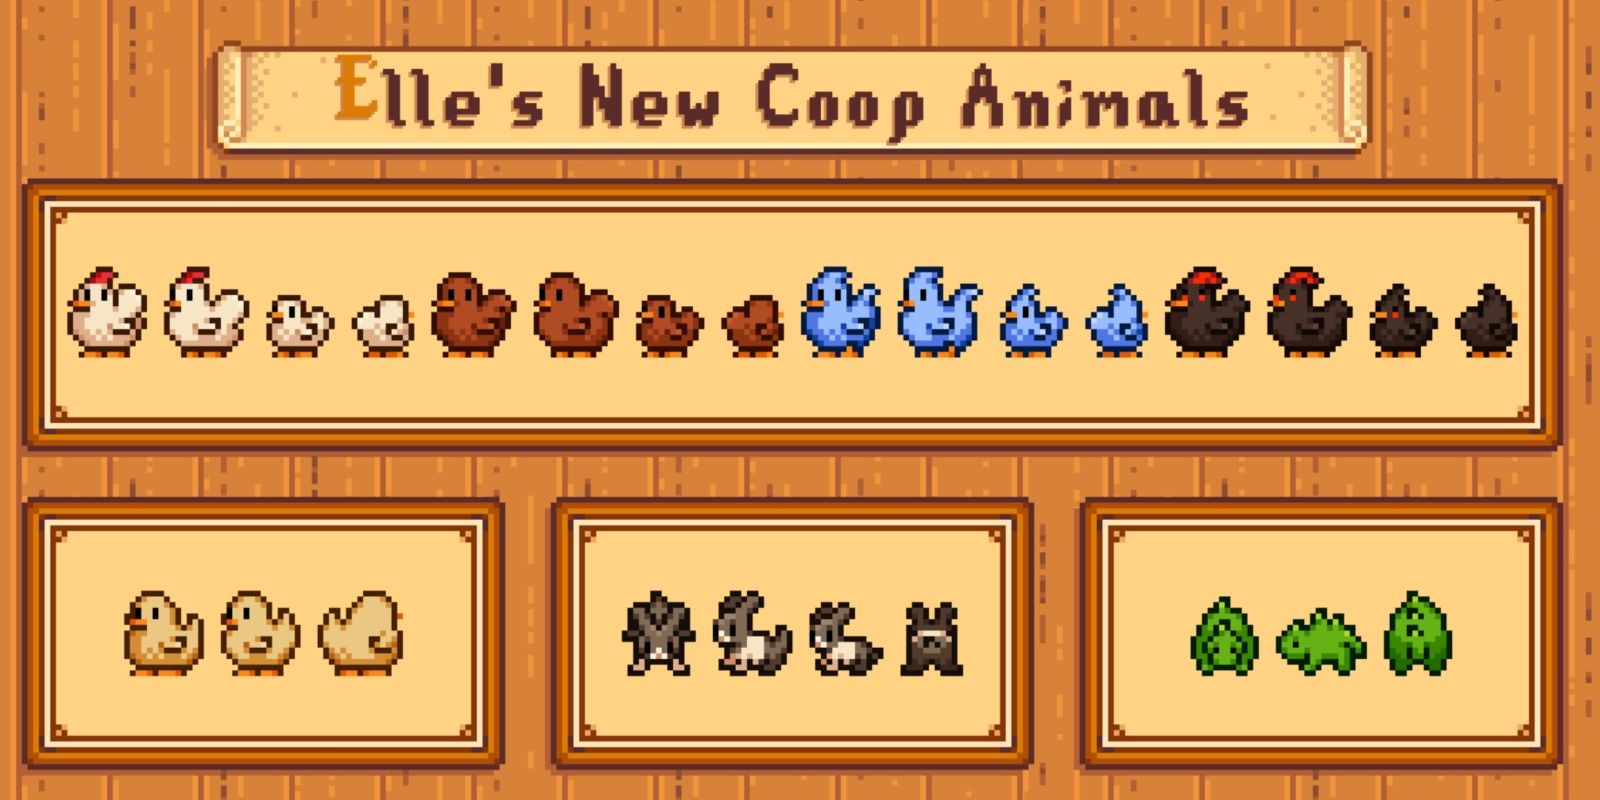 Mod That Adds More Coop Animals